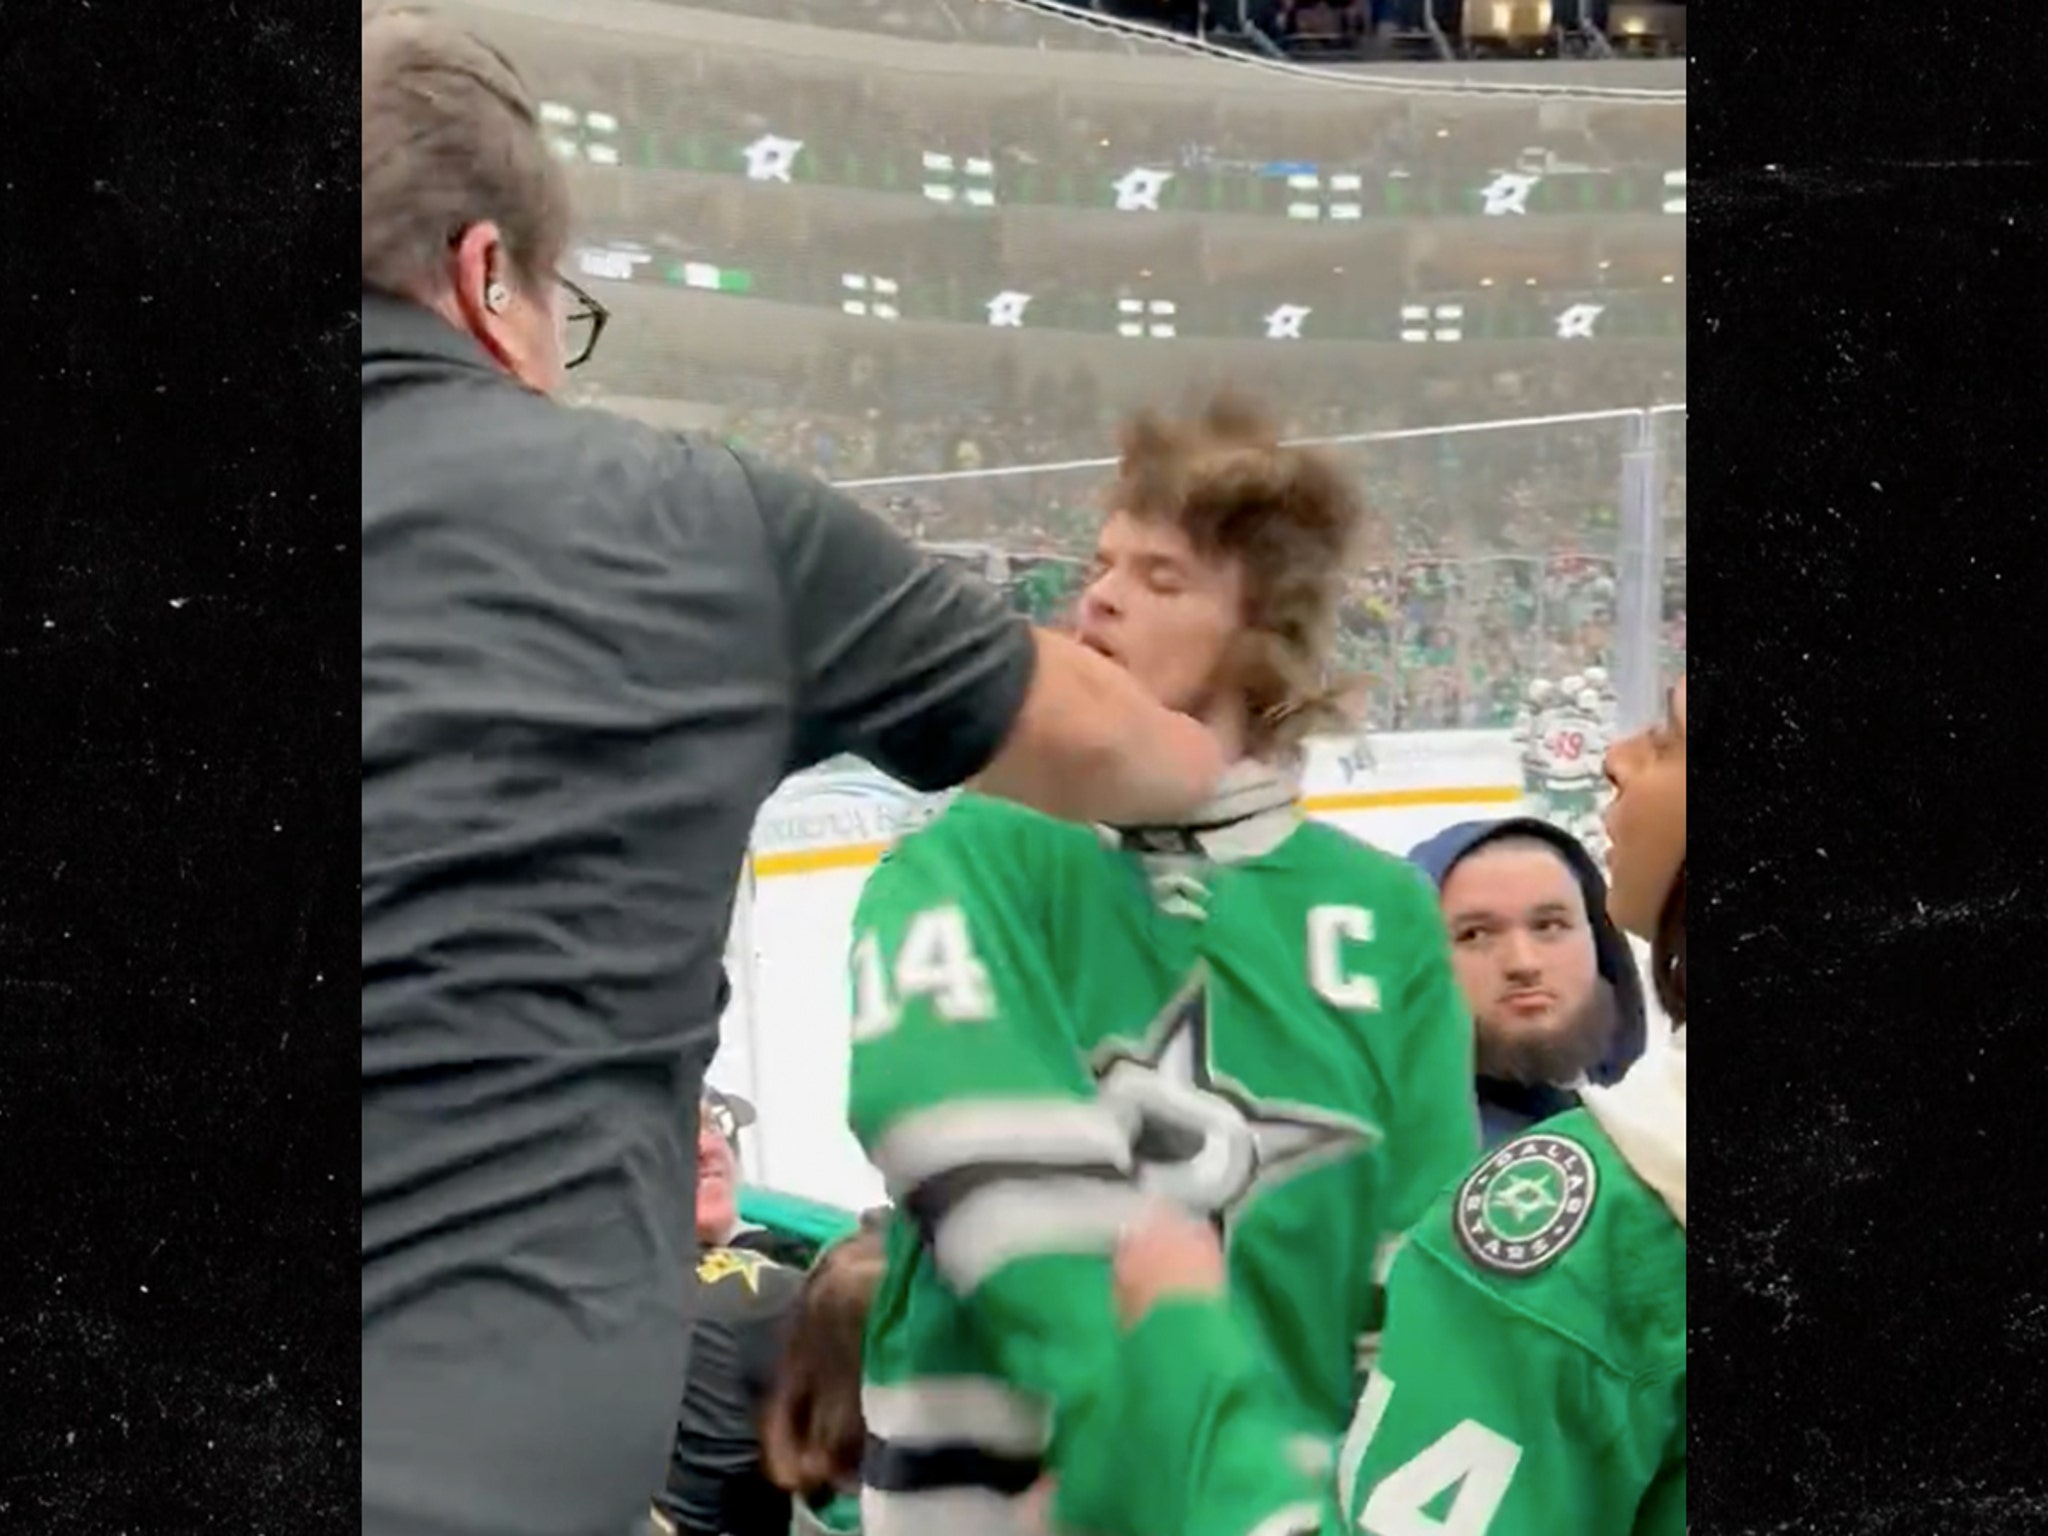 Dallas Stars on X: For you, lil Stars fans, a new set of